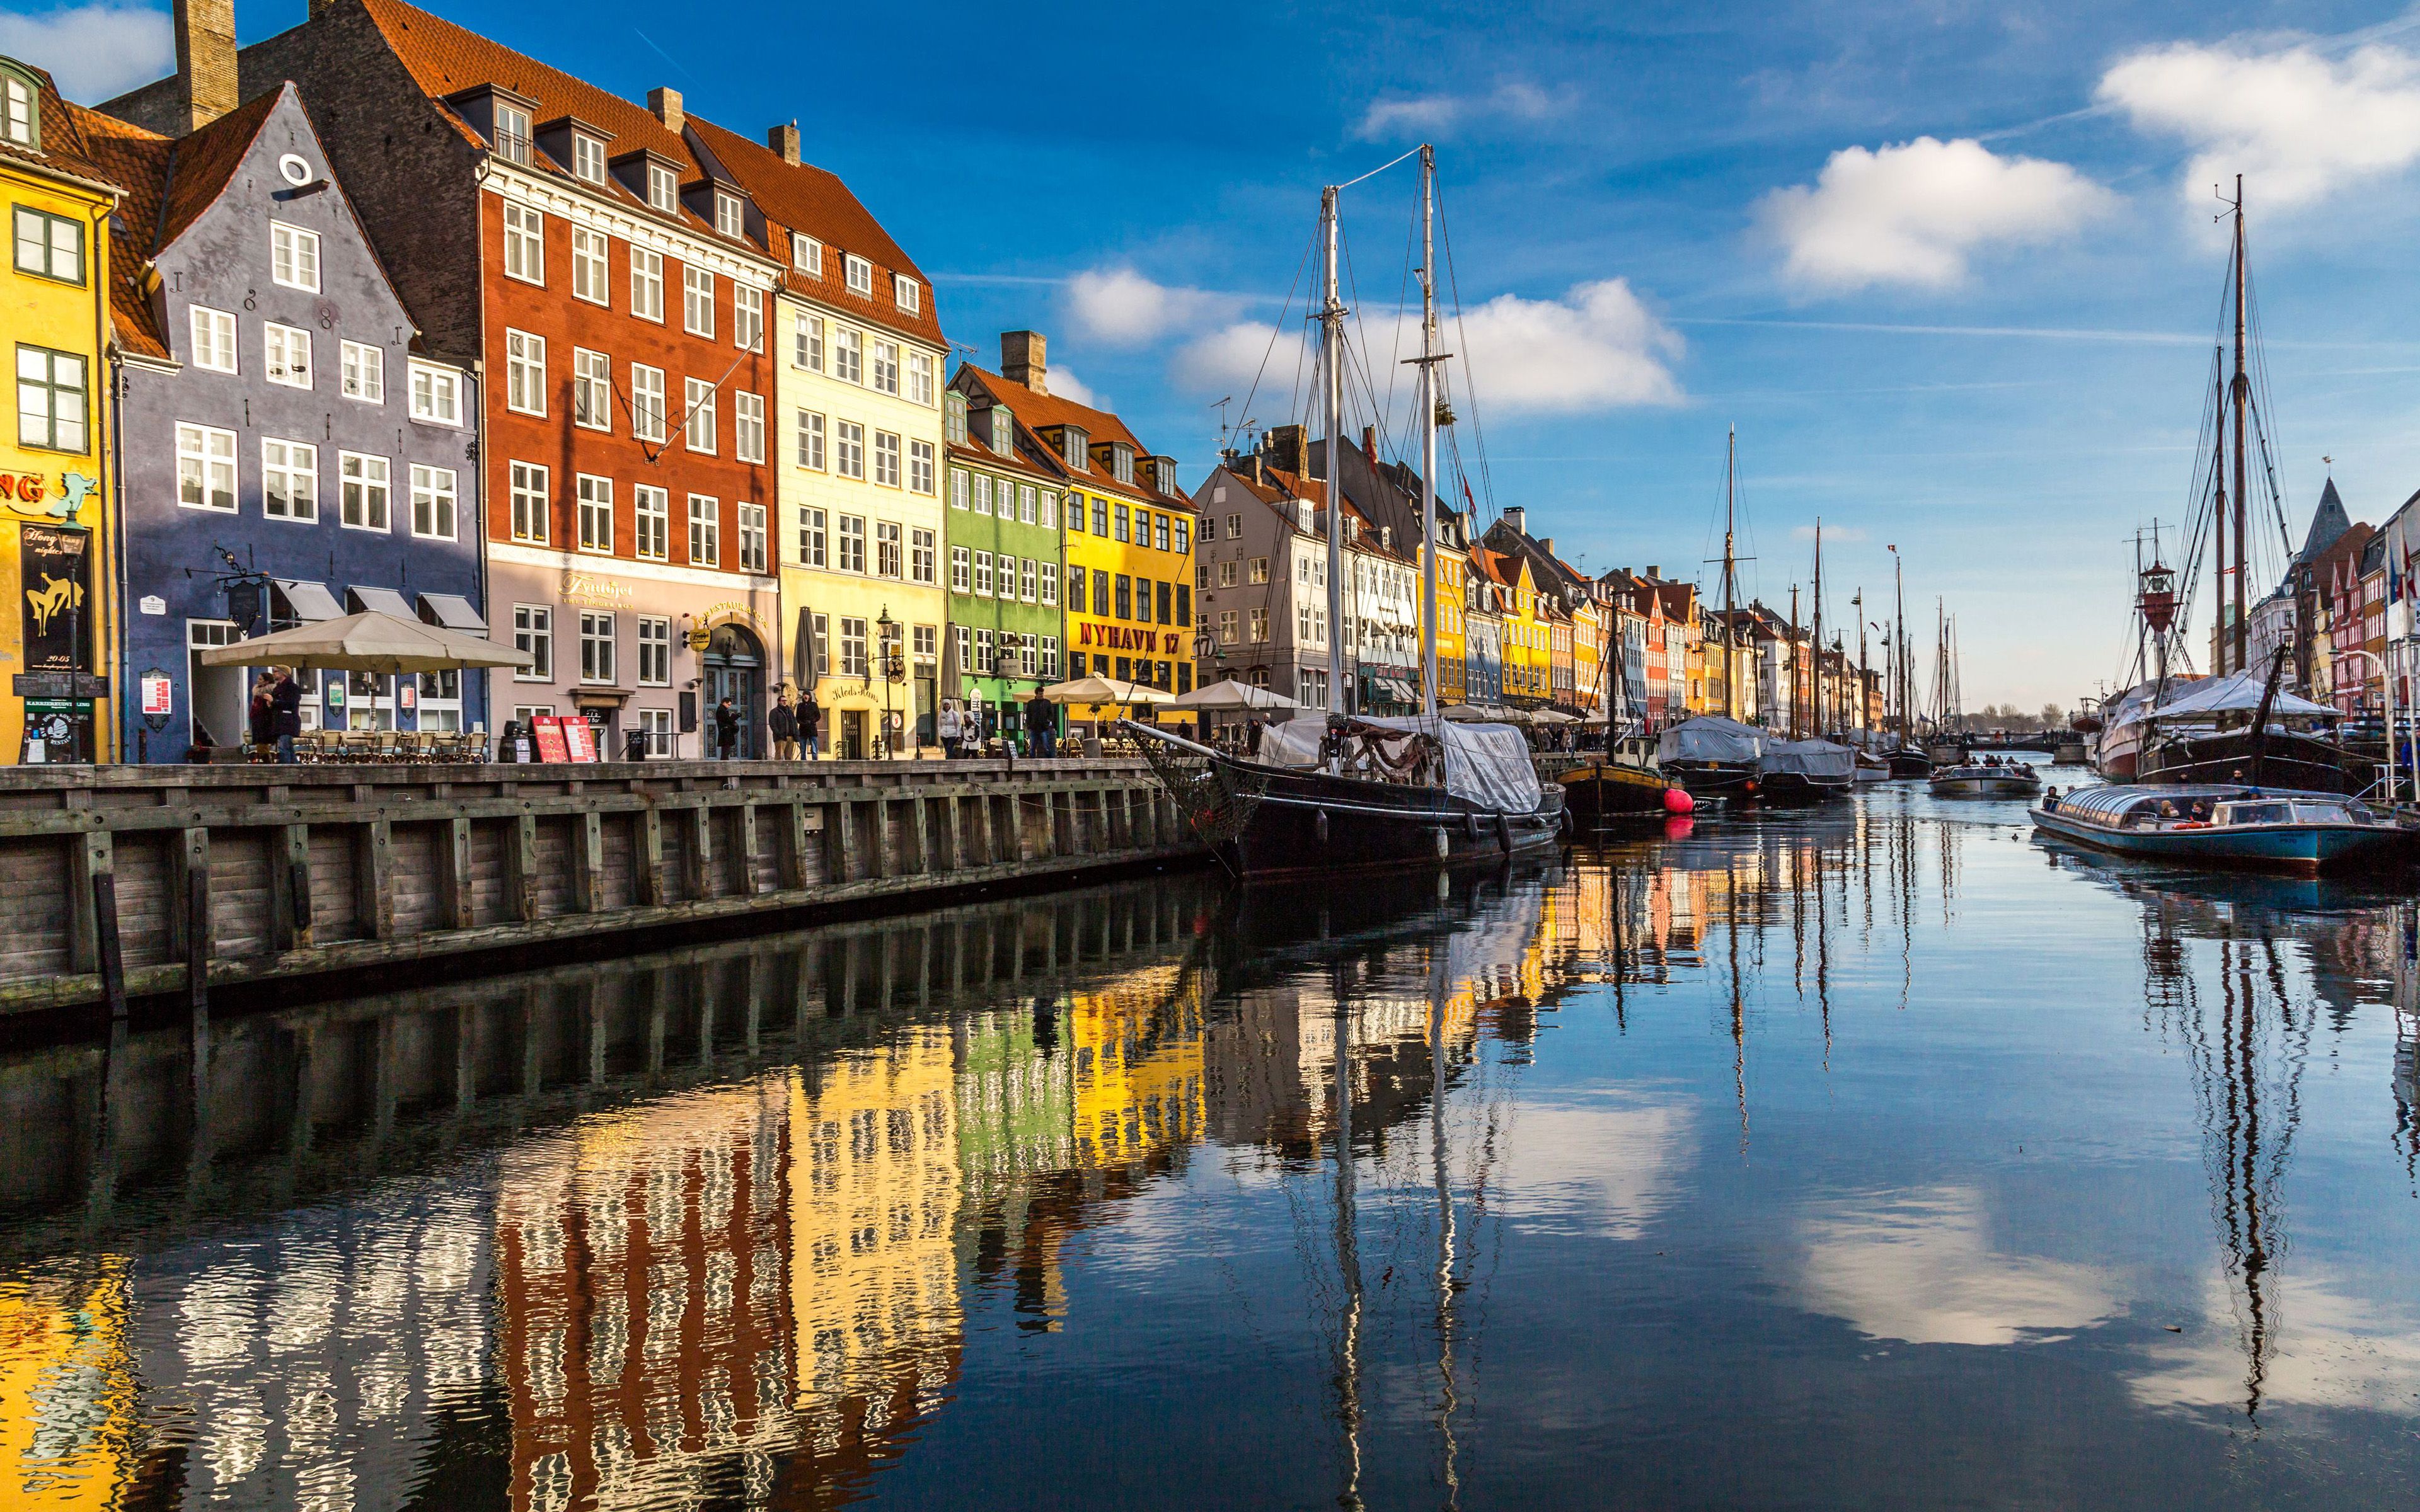 Download wallpaper Copenhagen, 4k, Denmark, colorful houses, embankment, old ship for desktop with resolution 3840x2400. High Quality HD picture wallpaper